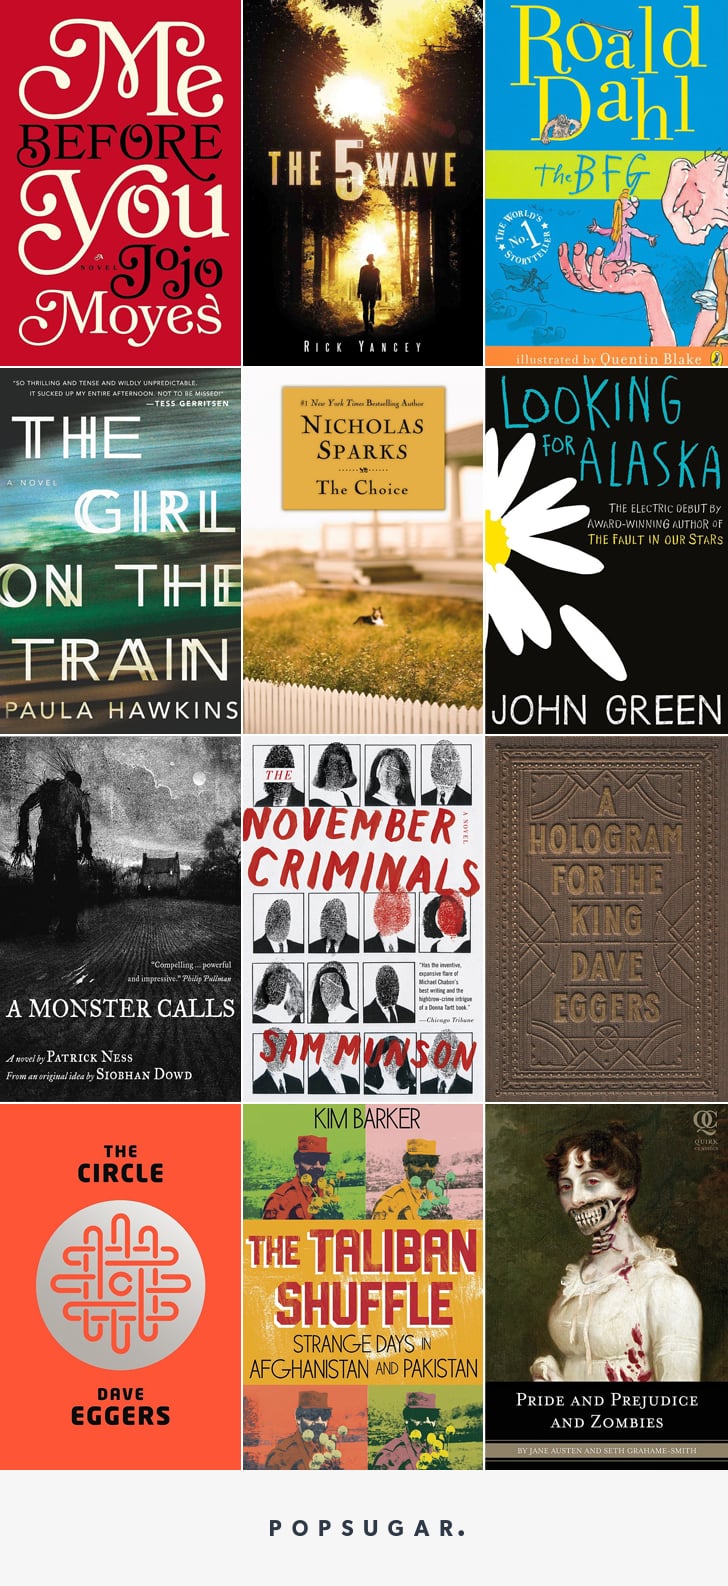 28 Books Becoming 2016 Movies